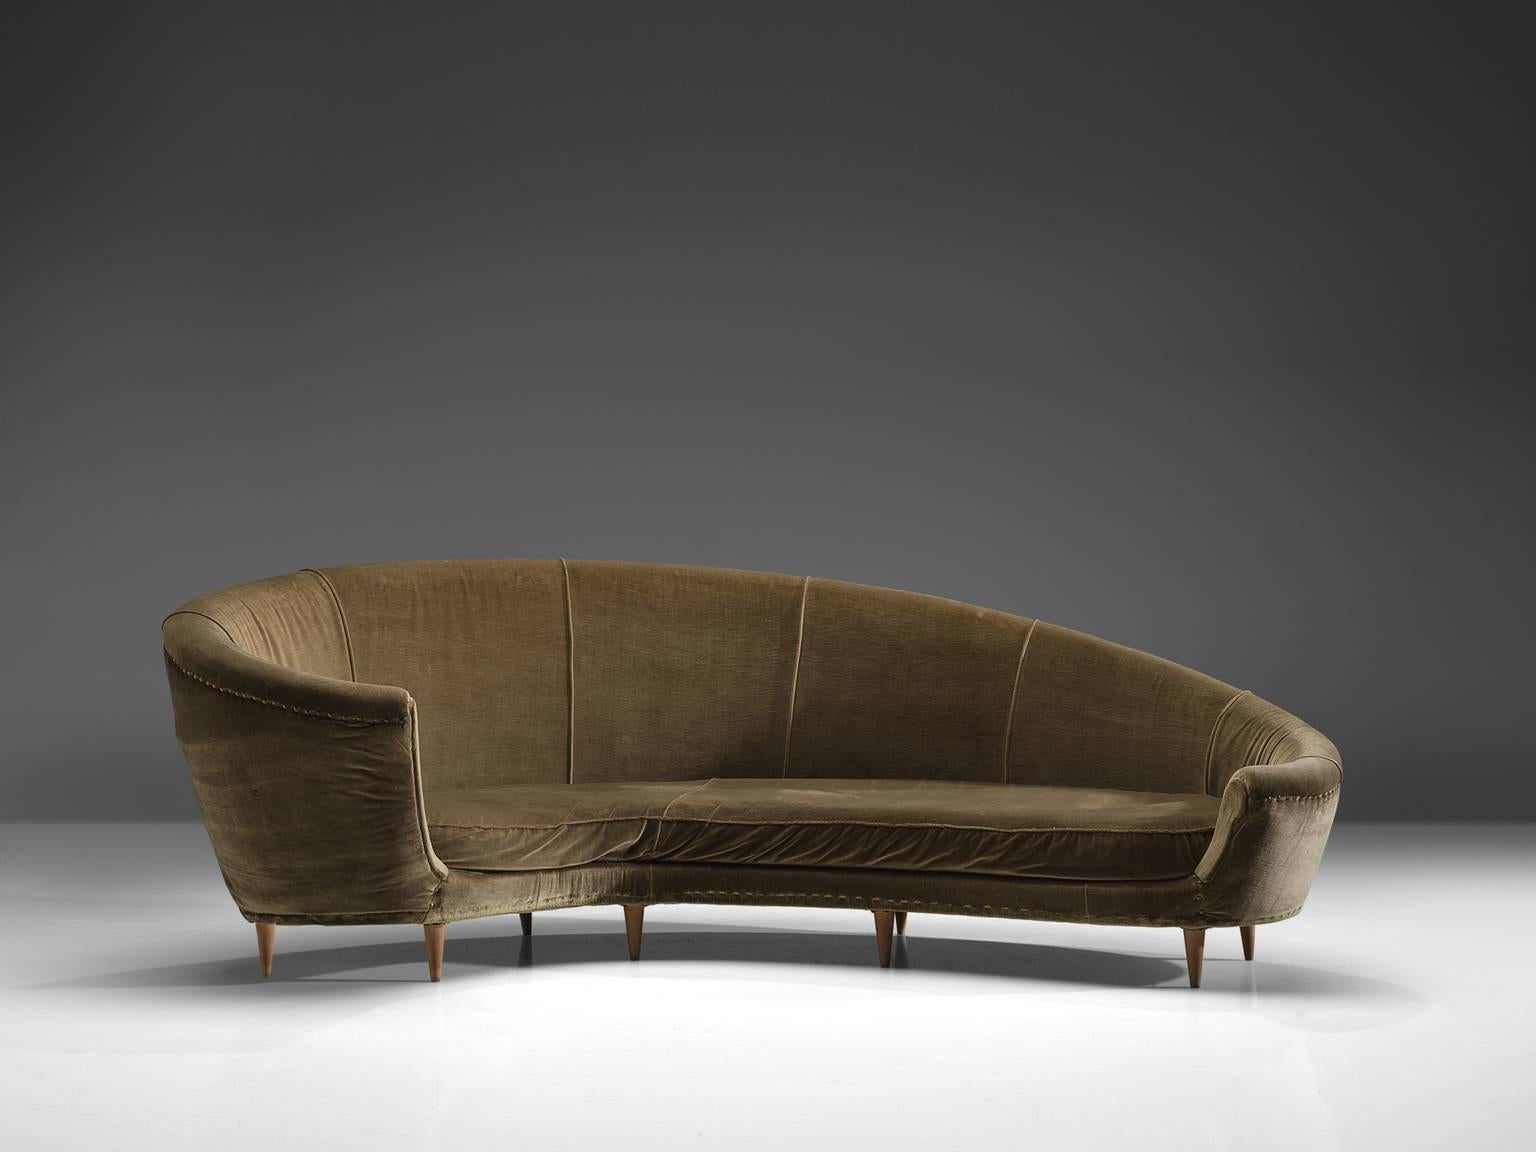 Sofa, green velvet fabric, wood, Italy, 1950s

This dynamic sofa features an a-symmetrical back that is higher on the left side and slowly slopes towards much lower end on the right side. The six tapered delicate legs are executed in blond wood